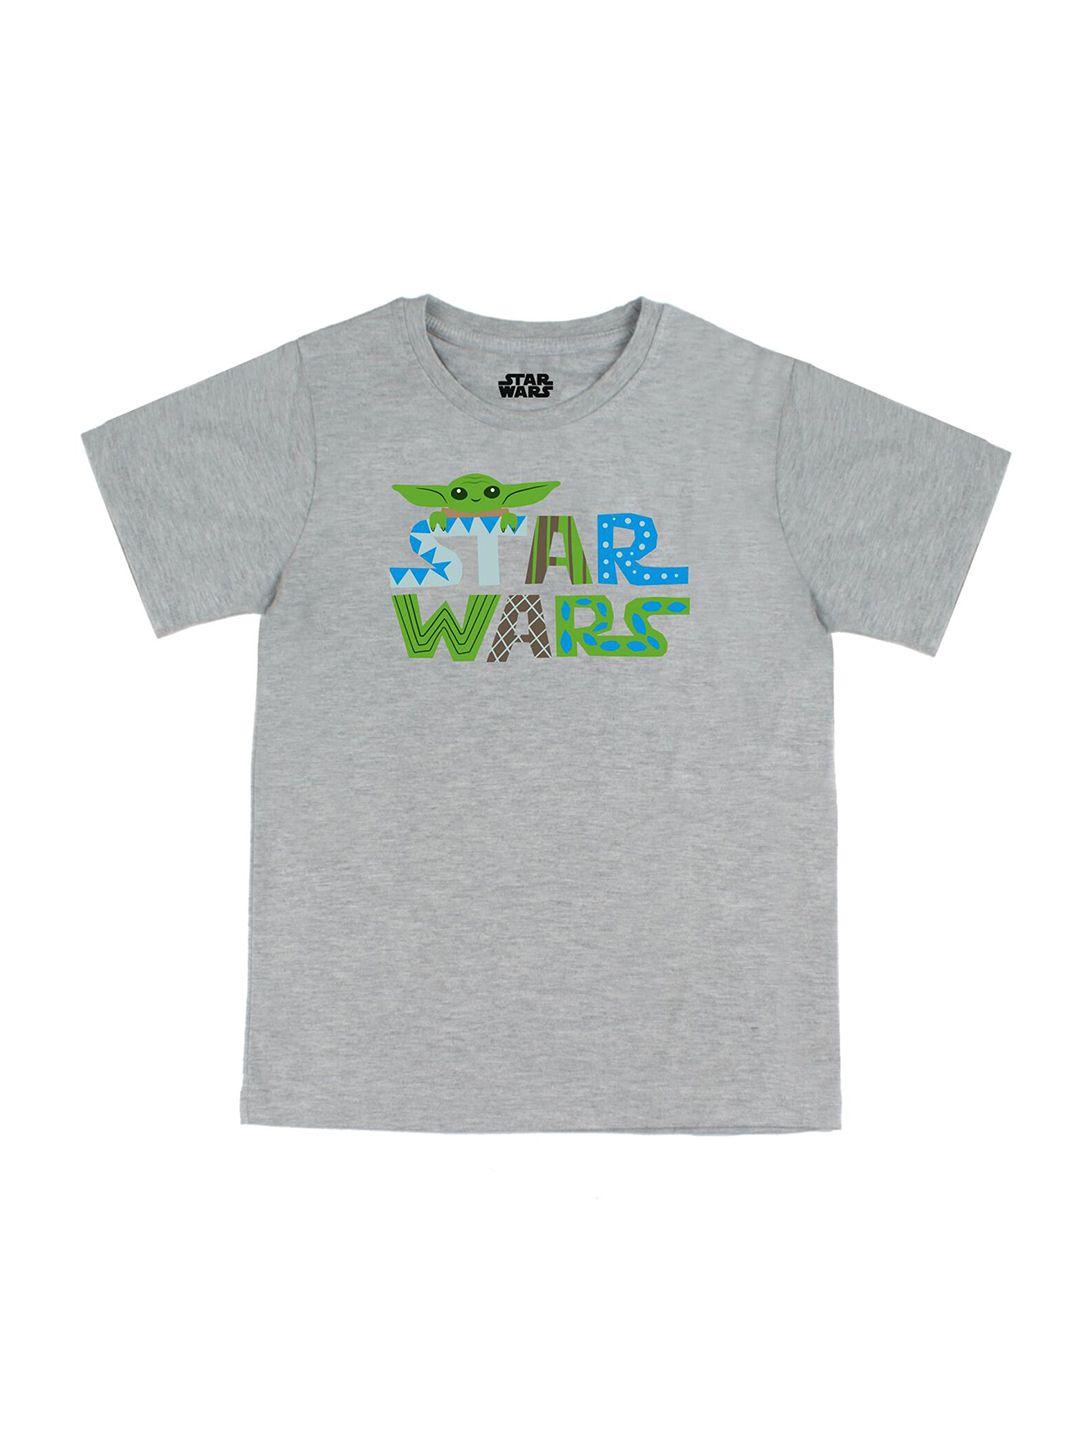 star wars by wear your mind boys grey & green star wars printed pure cotton t-shirt